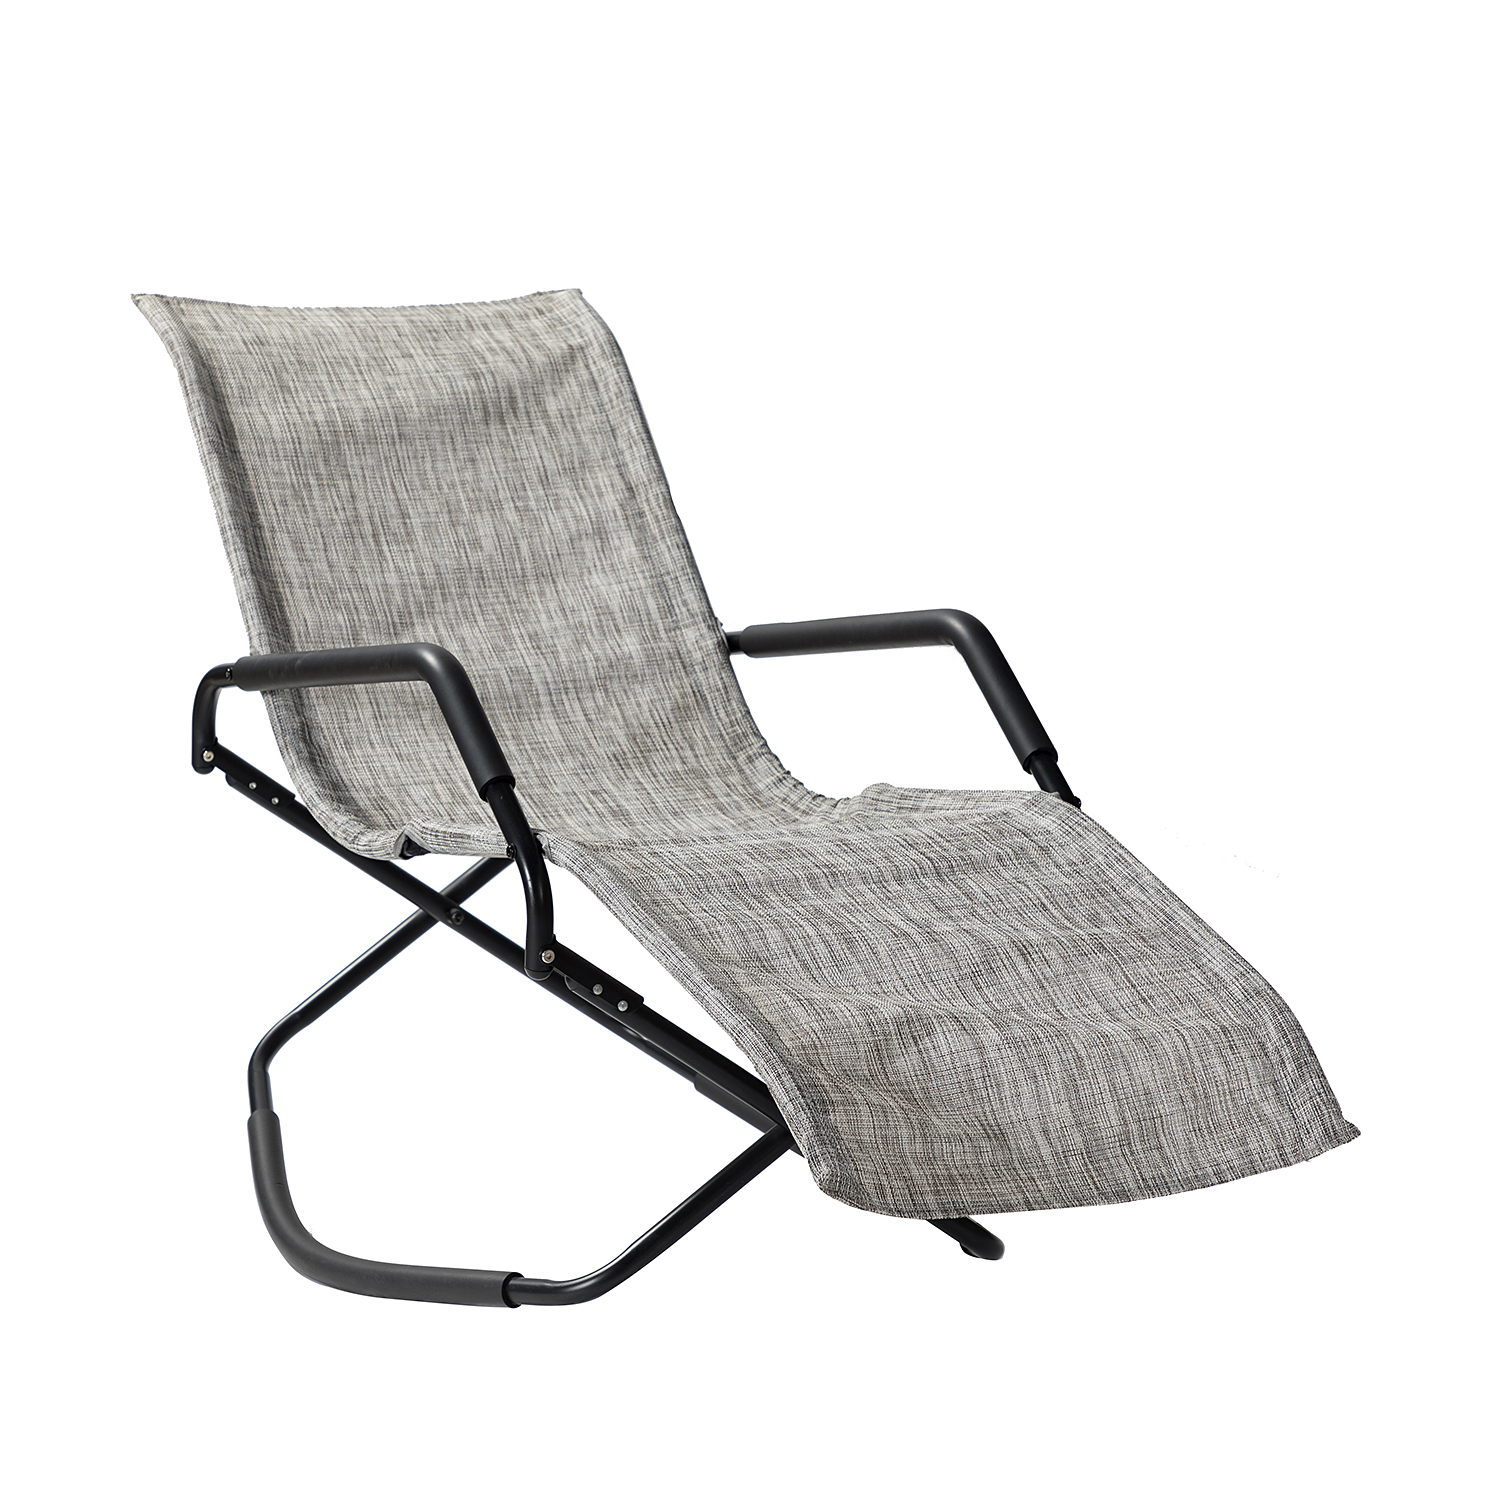 Camping Rocking Chair, Outdoor Folding Lounge Chaise Chair, Portable Beach Chair with Armrests, Folding Lounge Chair, Patio Reclining Lounge Chair for Pool, Garden, Lawn, Deck, D7847 - image 2 of 10